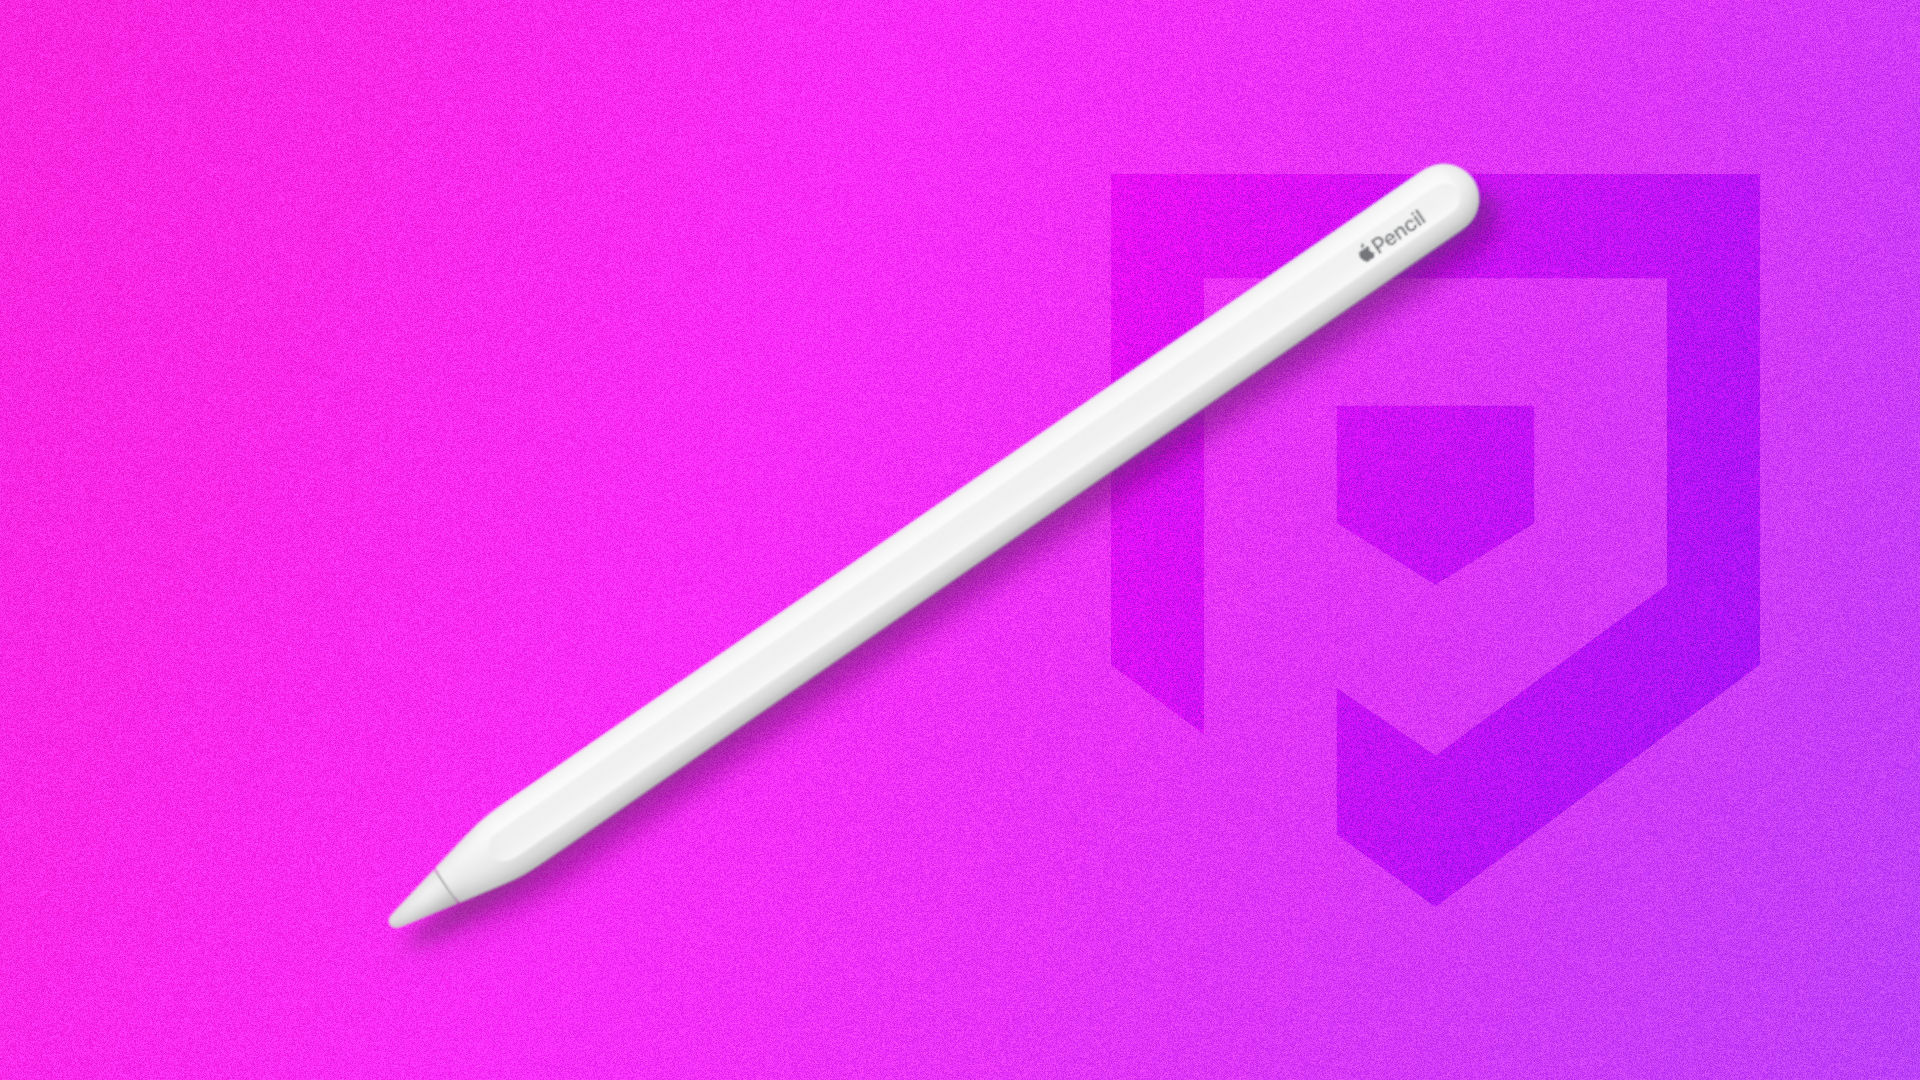 A picture of one of the best stylus for iPad and iPhone, the Apple Pencil 2nd Generation, in front of a purple Pocket Tactics background